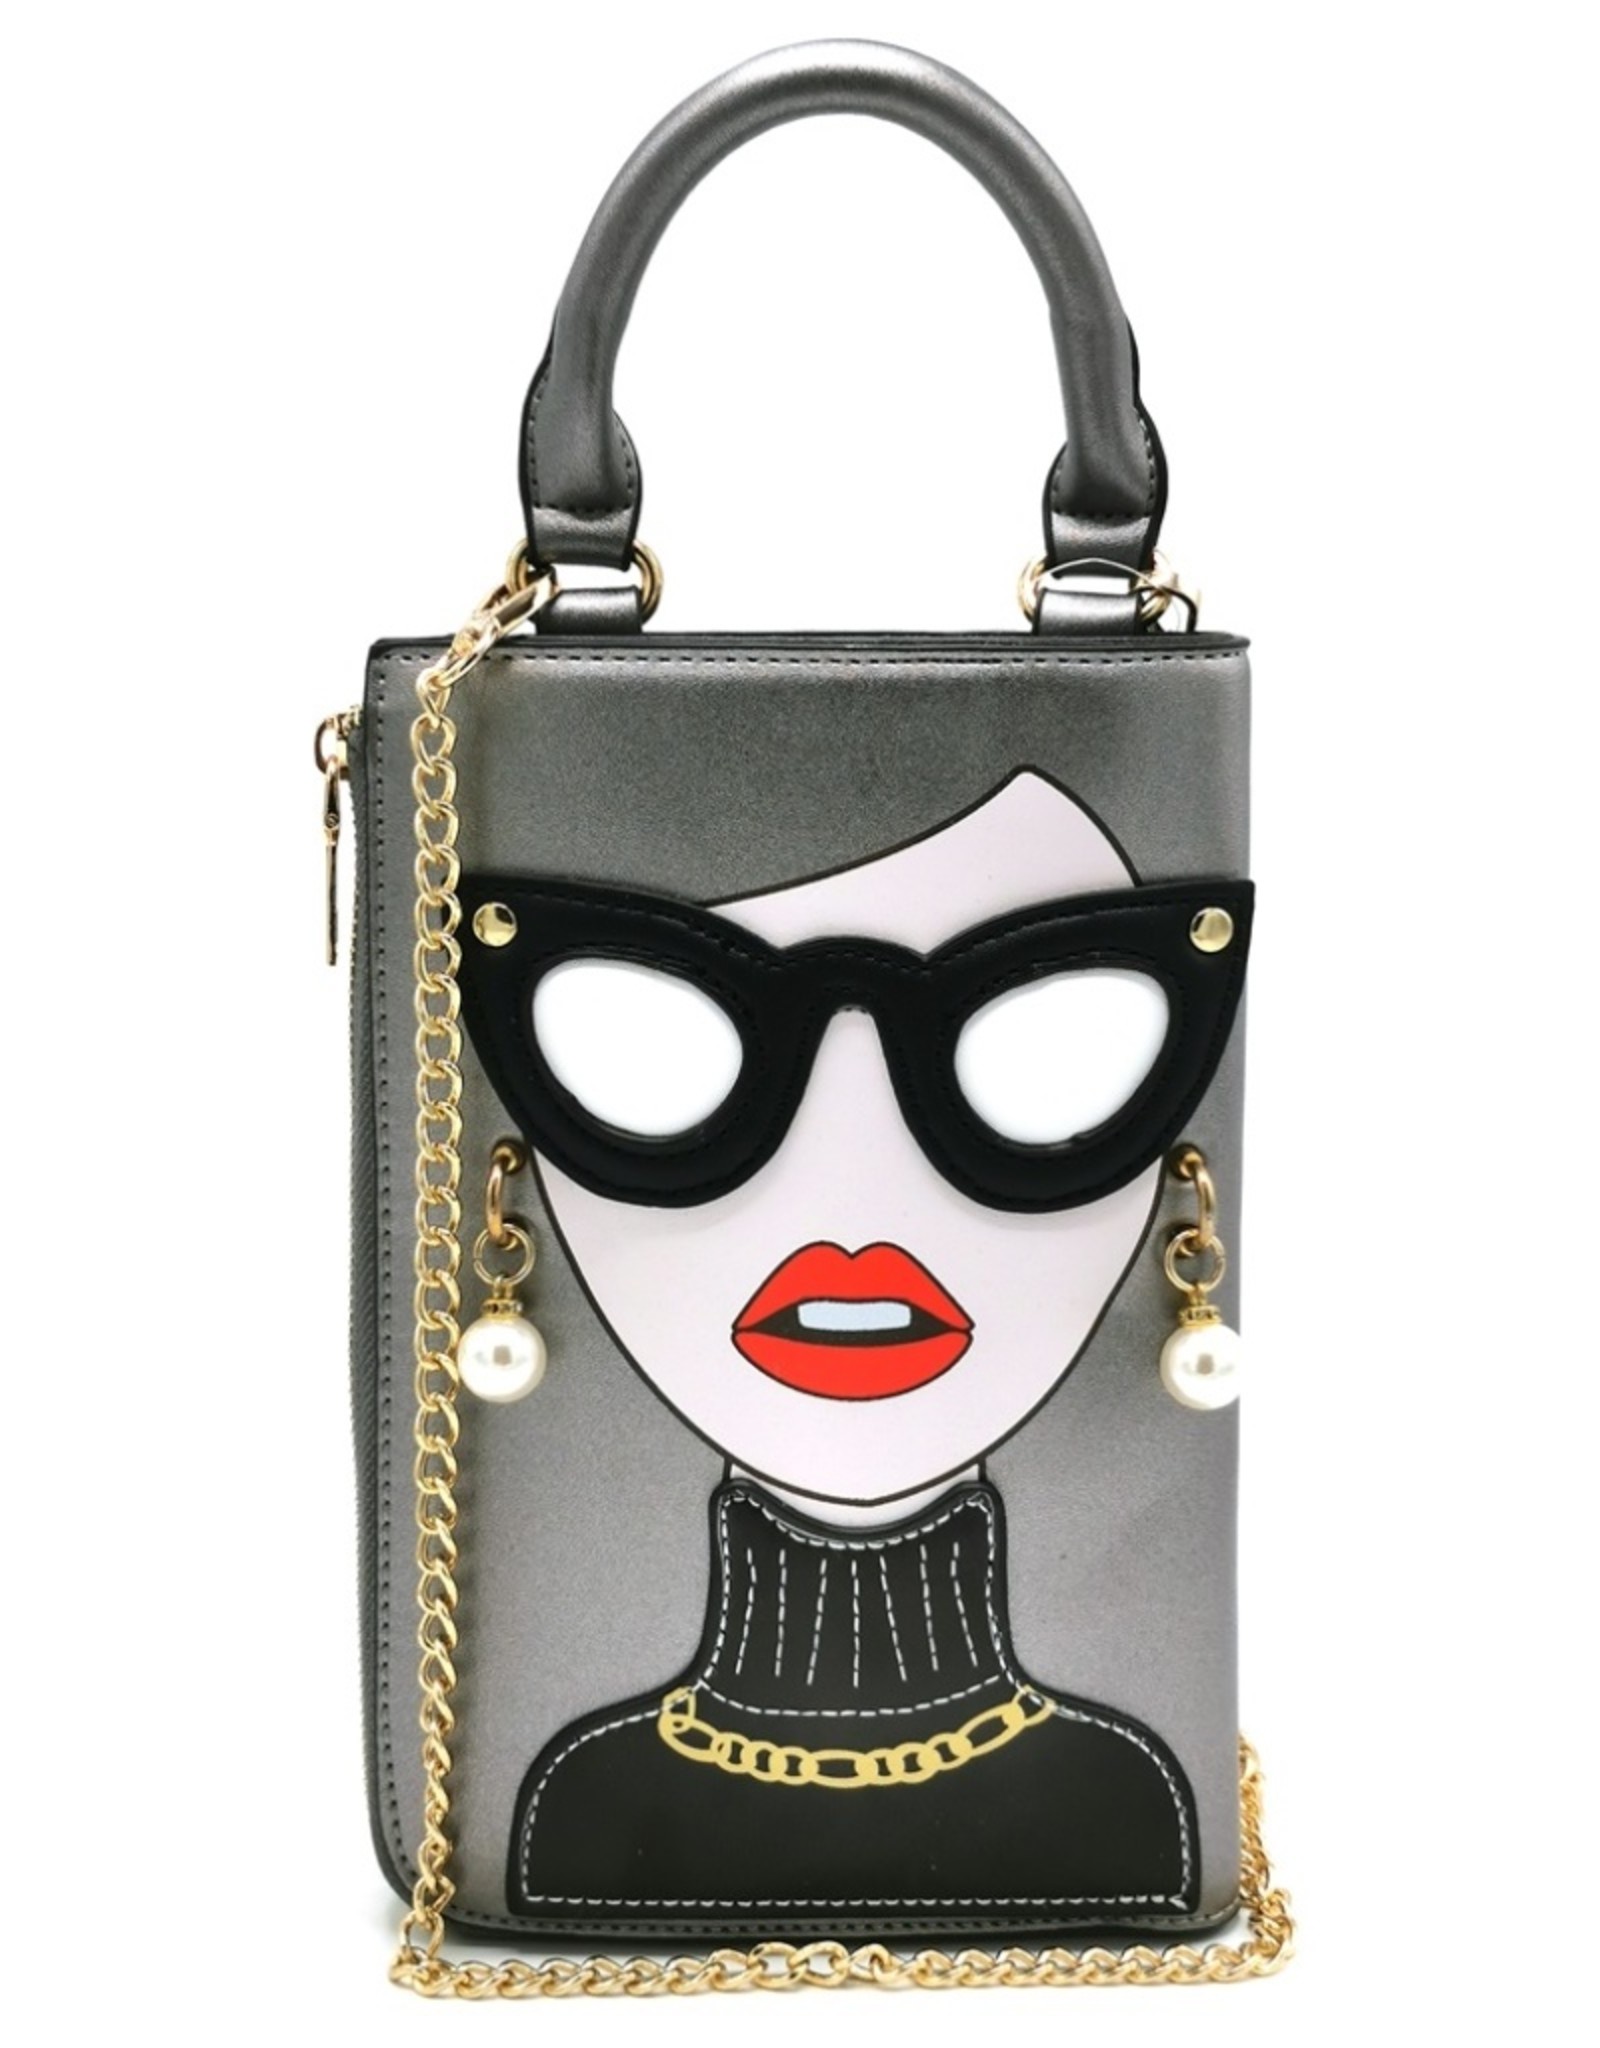 Magic Bags Fantasy bags -  Fantasy clutch Ladies Face with earrings and sunglasses (grey)